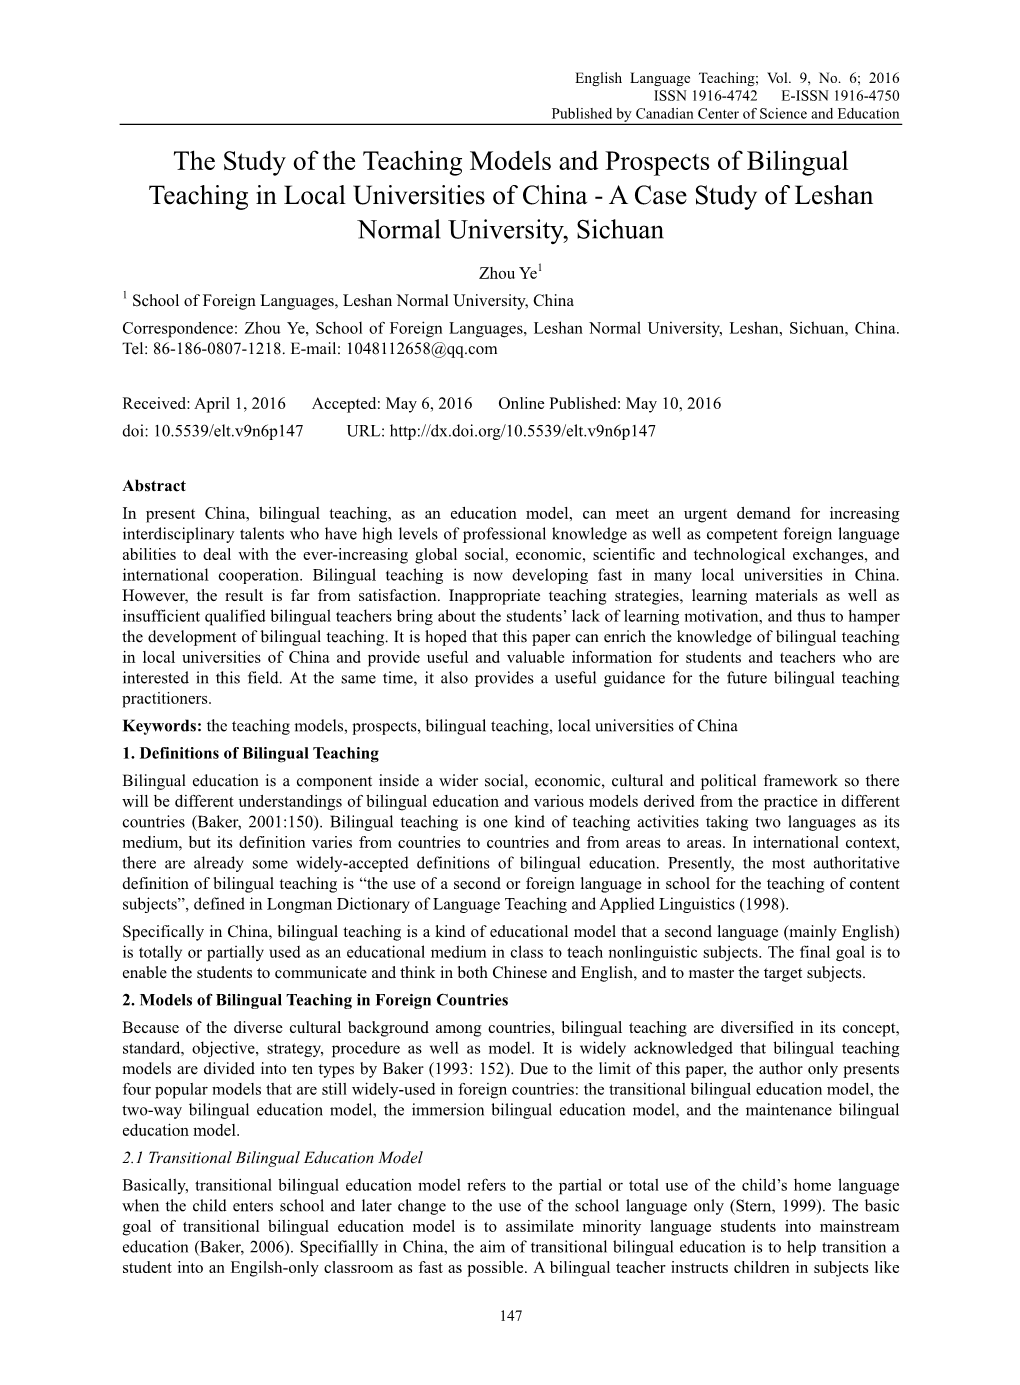 The Study of the Teaching Models and Prospects of Bilingual Teaching in Local Universities of China - a Case Study of Leshan Normal University, Sichuan